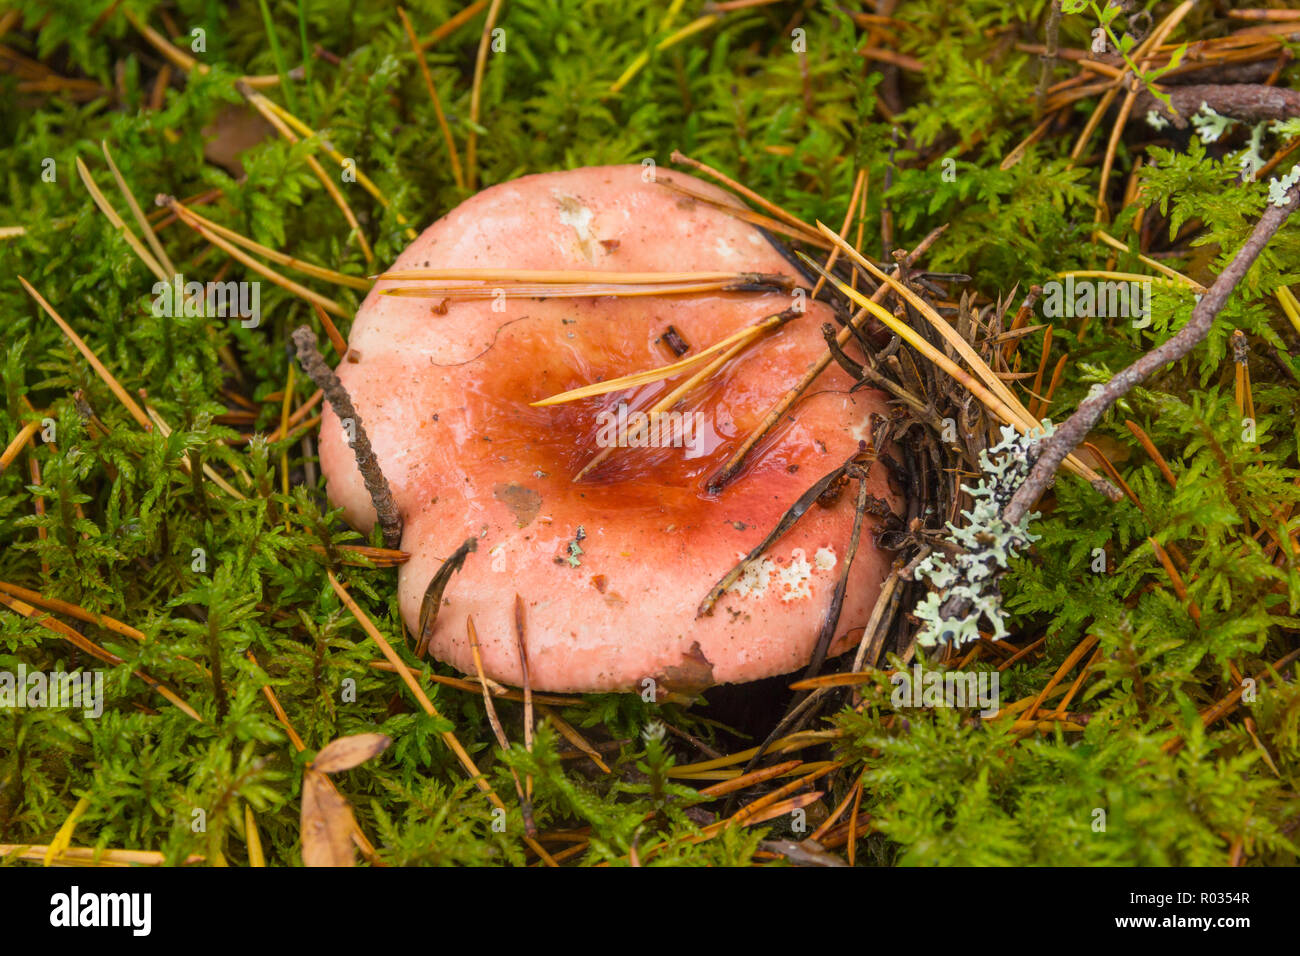 Russula mushroom grow up in the forest Stock Photo